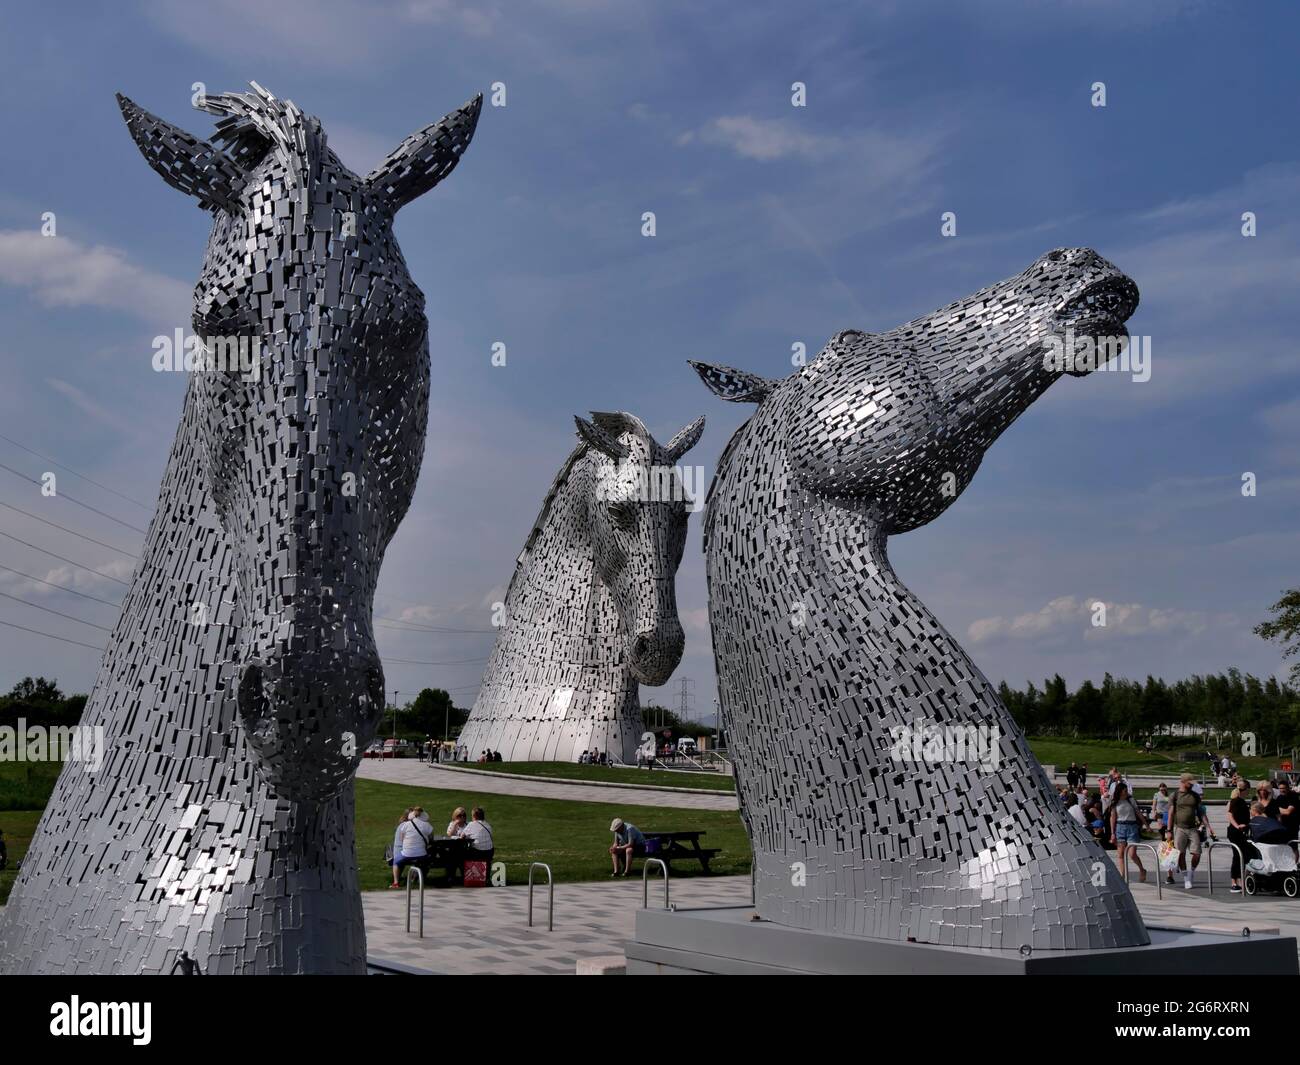 an unusual view of 3 kelpies as the Kelpie Maquettes frame one of the full size Kelpies, horse-head sculptures by Artist  Andy Scott, Falkirk,Scotland Stock Photo